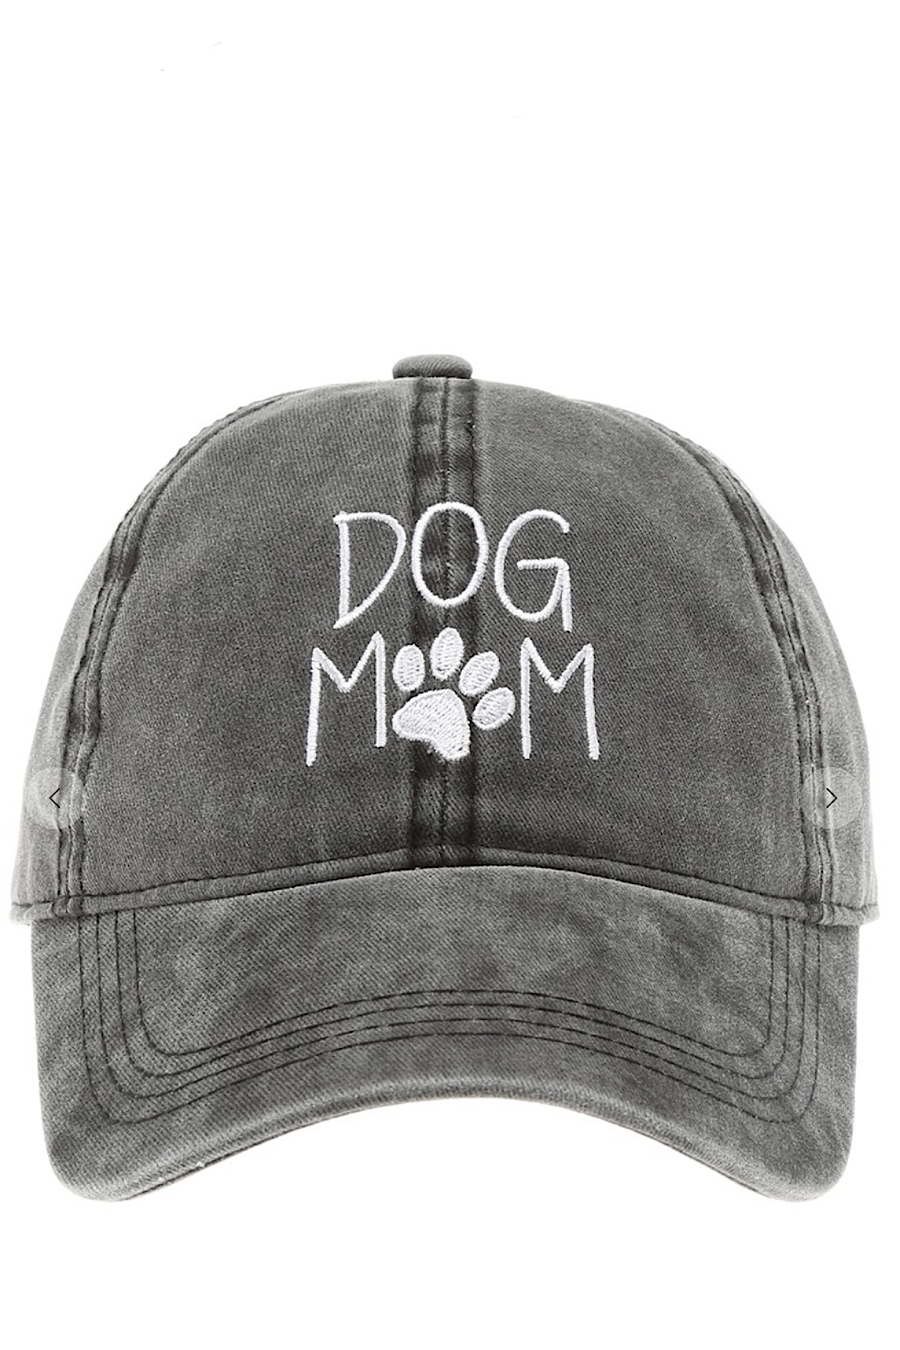 Dog Mom Hats in Black or Pink